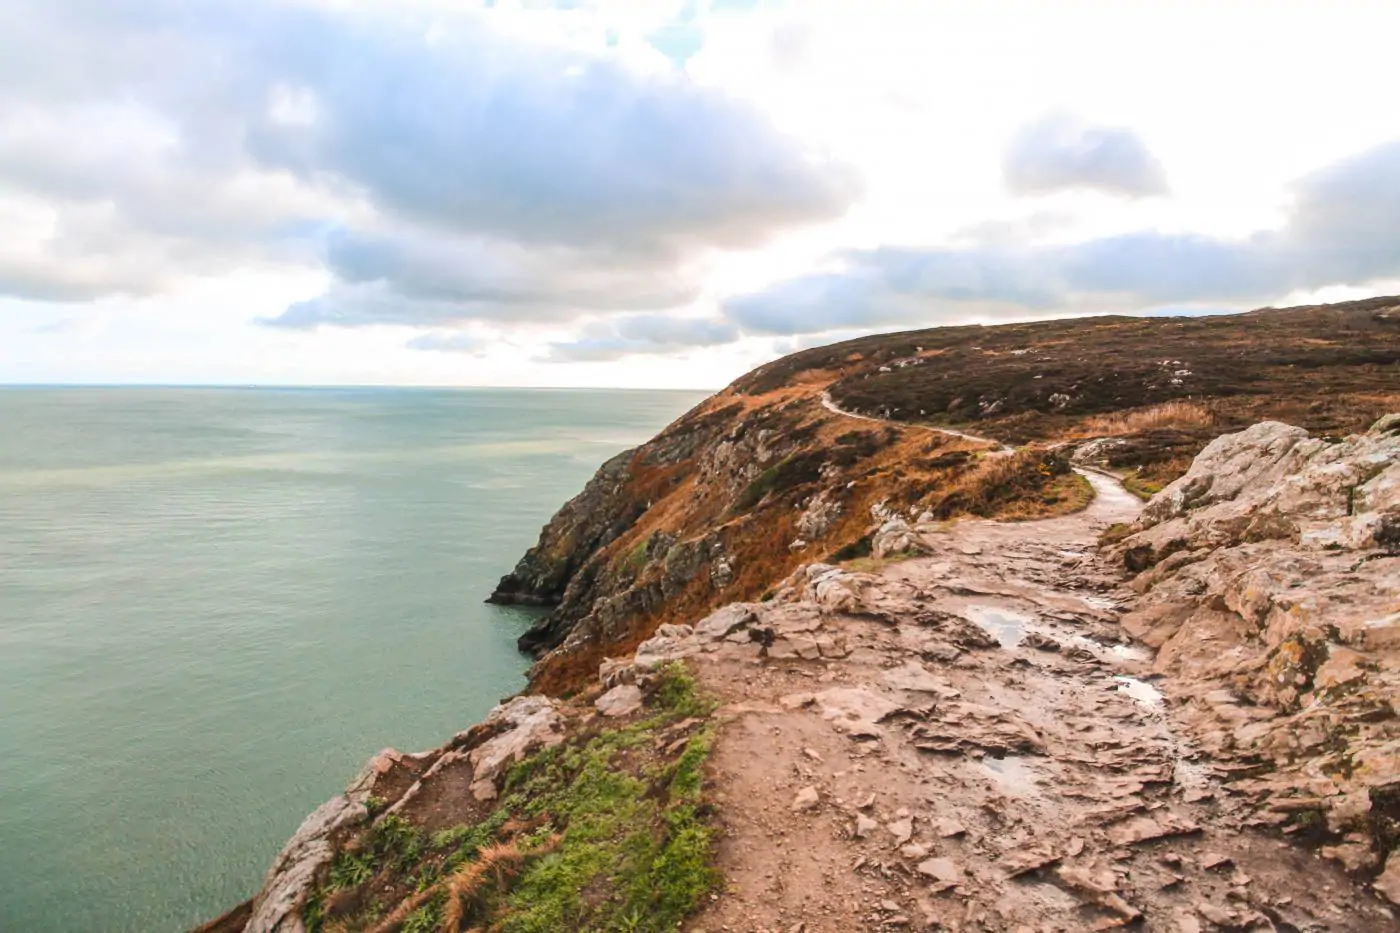 Views of the Howth Cliff Walk.